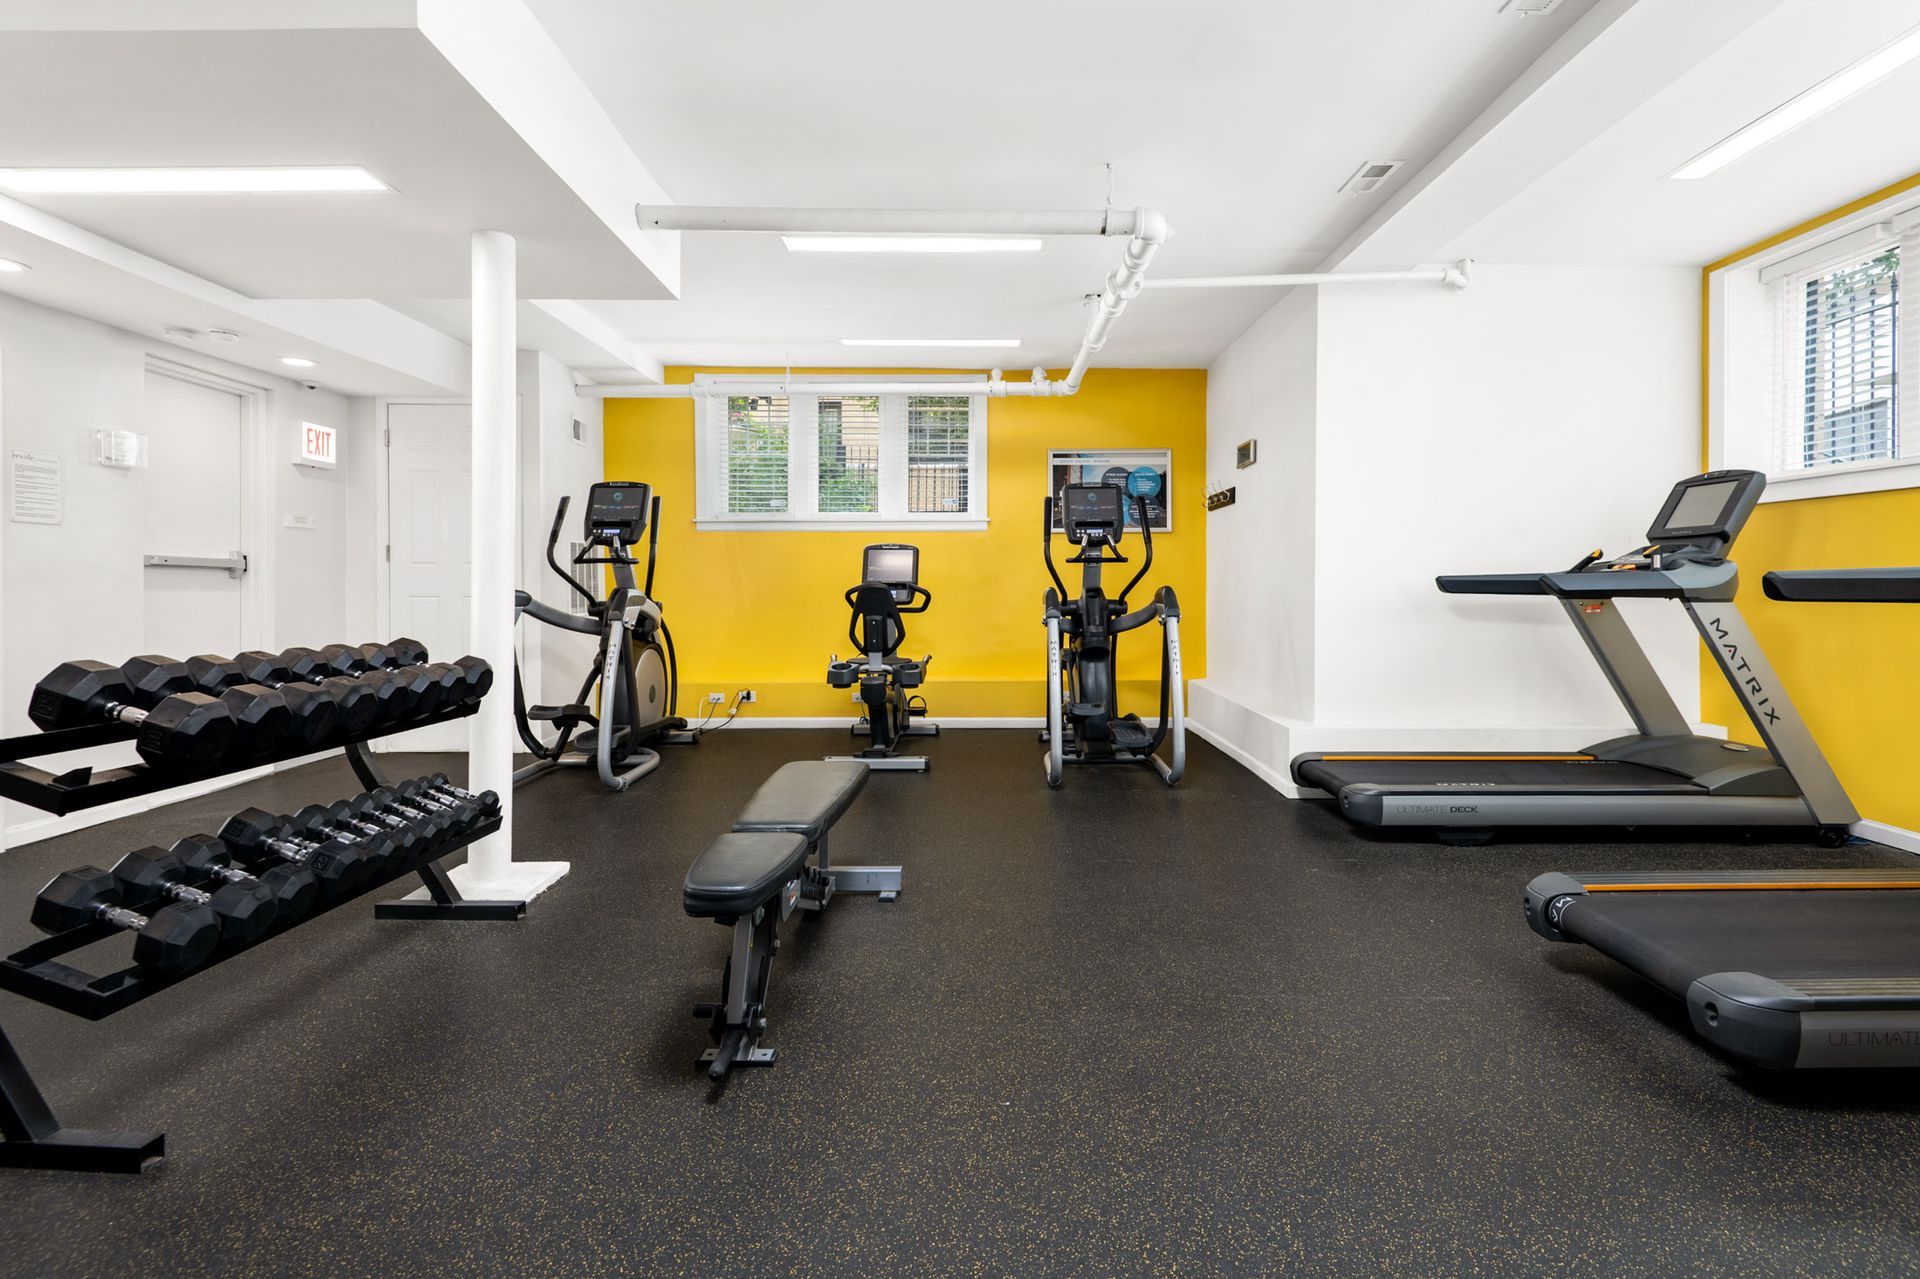 A fitness center with treadmills, bikes, dumbbells, and a bench.